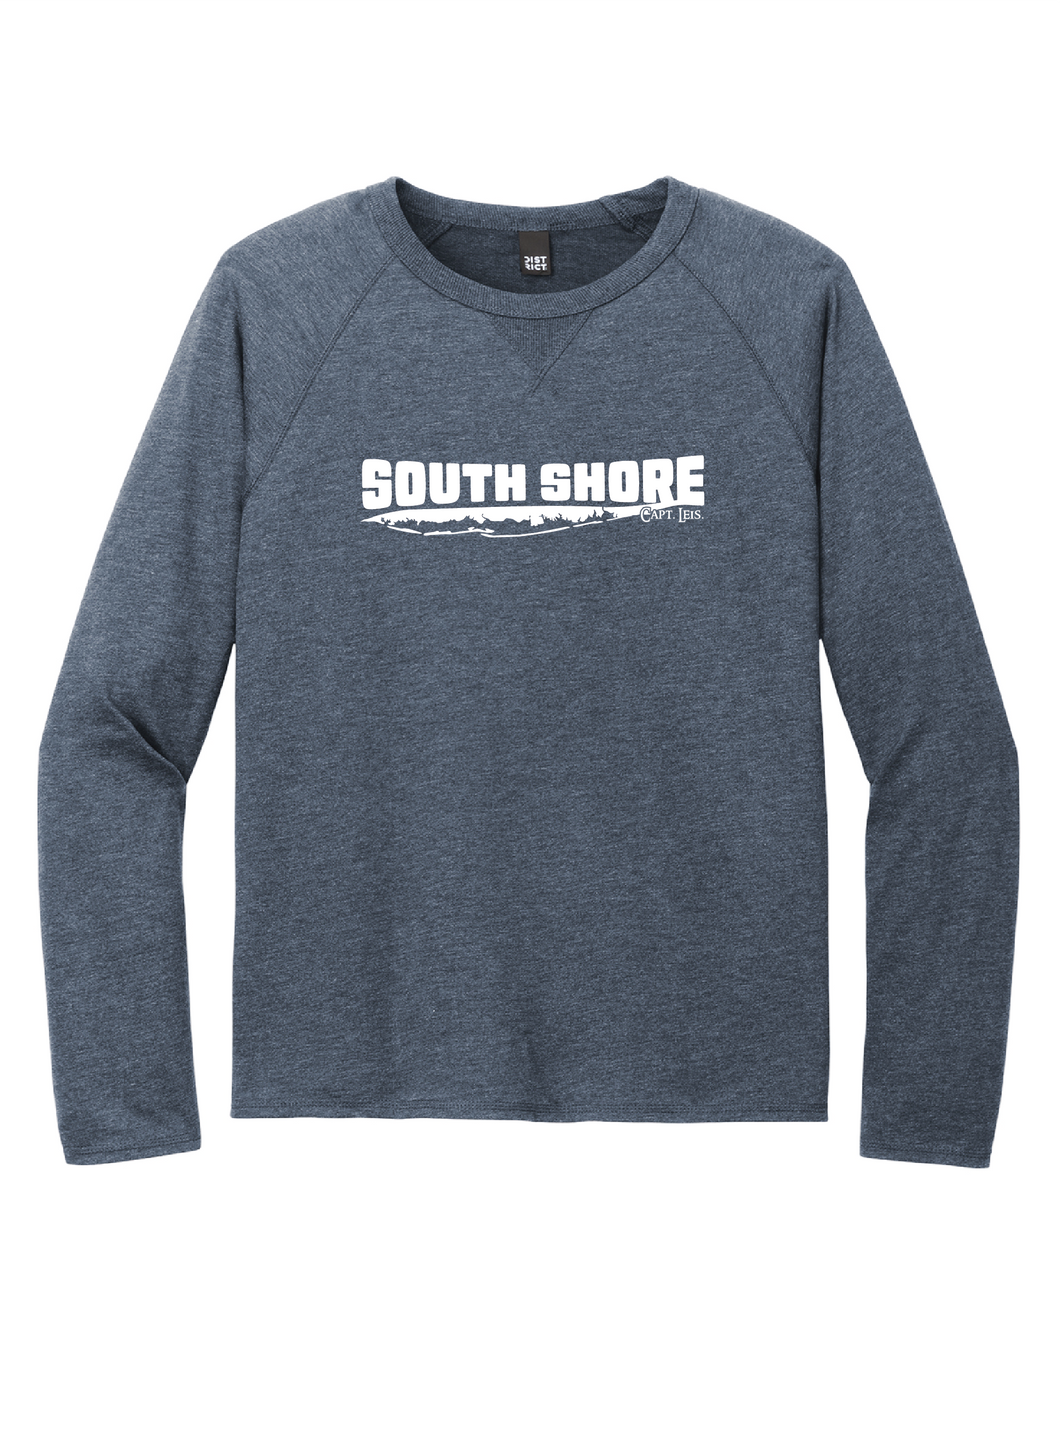 South Shore French Terry Long Sleeve - Navy